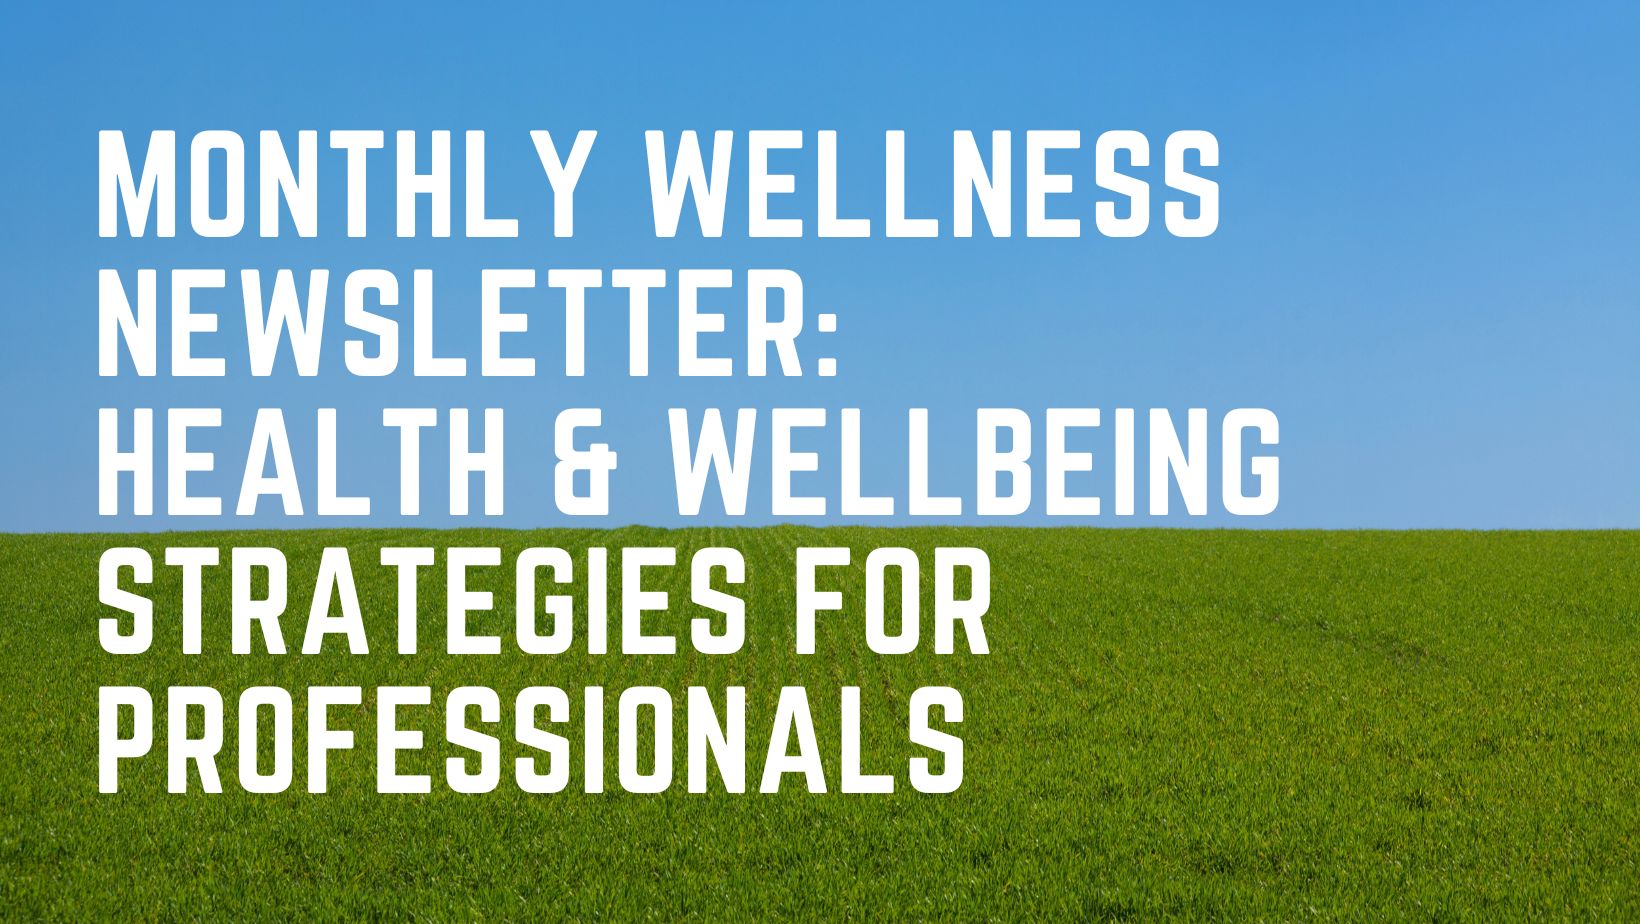 Monthly Wellness Newsletter: Health & Wellbeing Strategies for Professionals